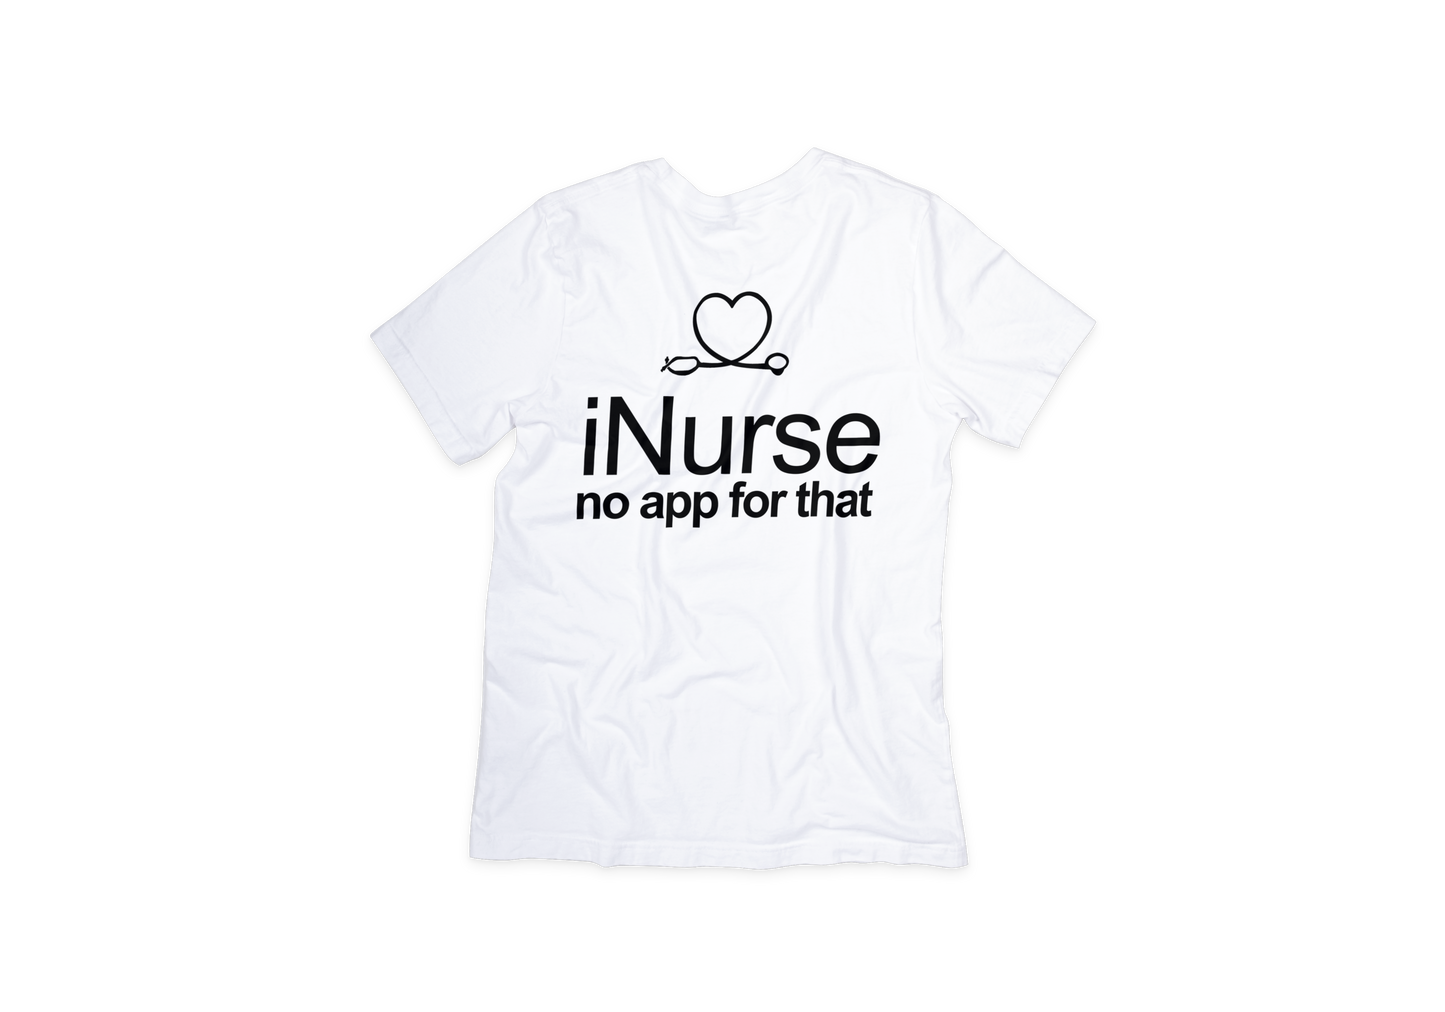 iNurse (no app for that) tee